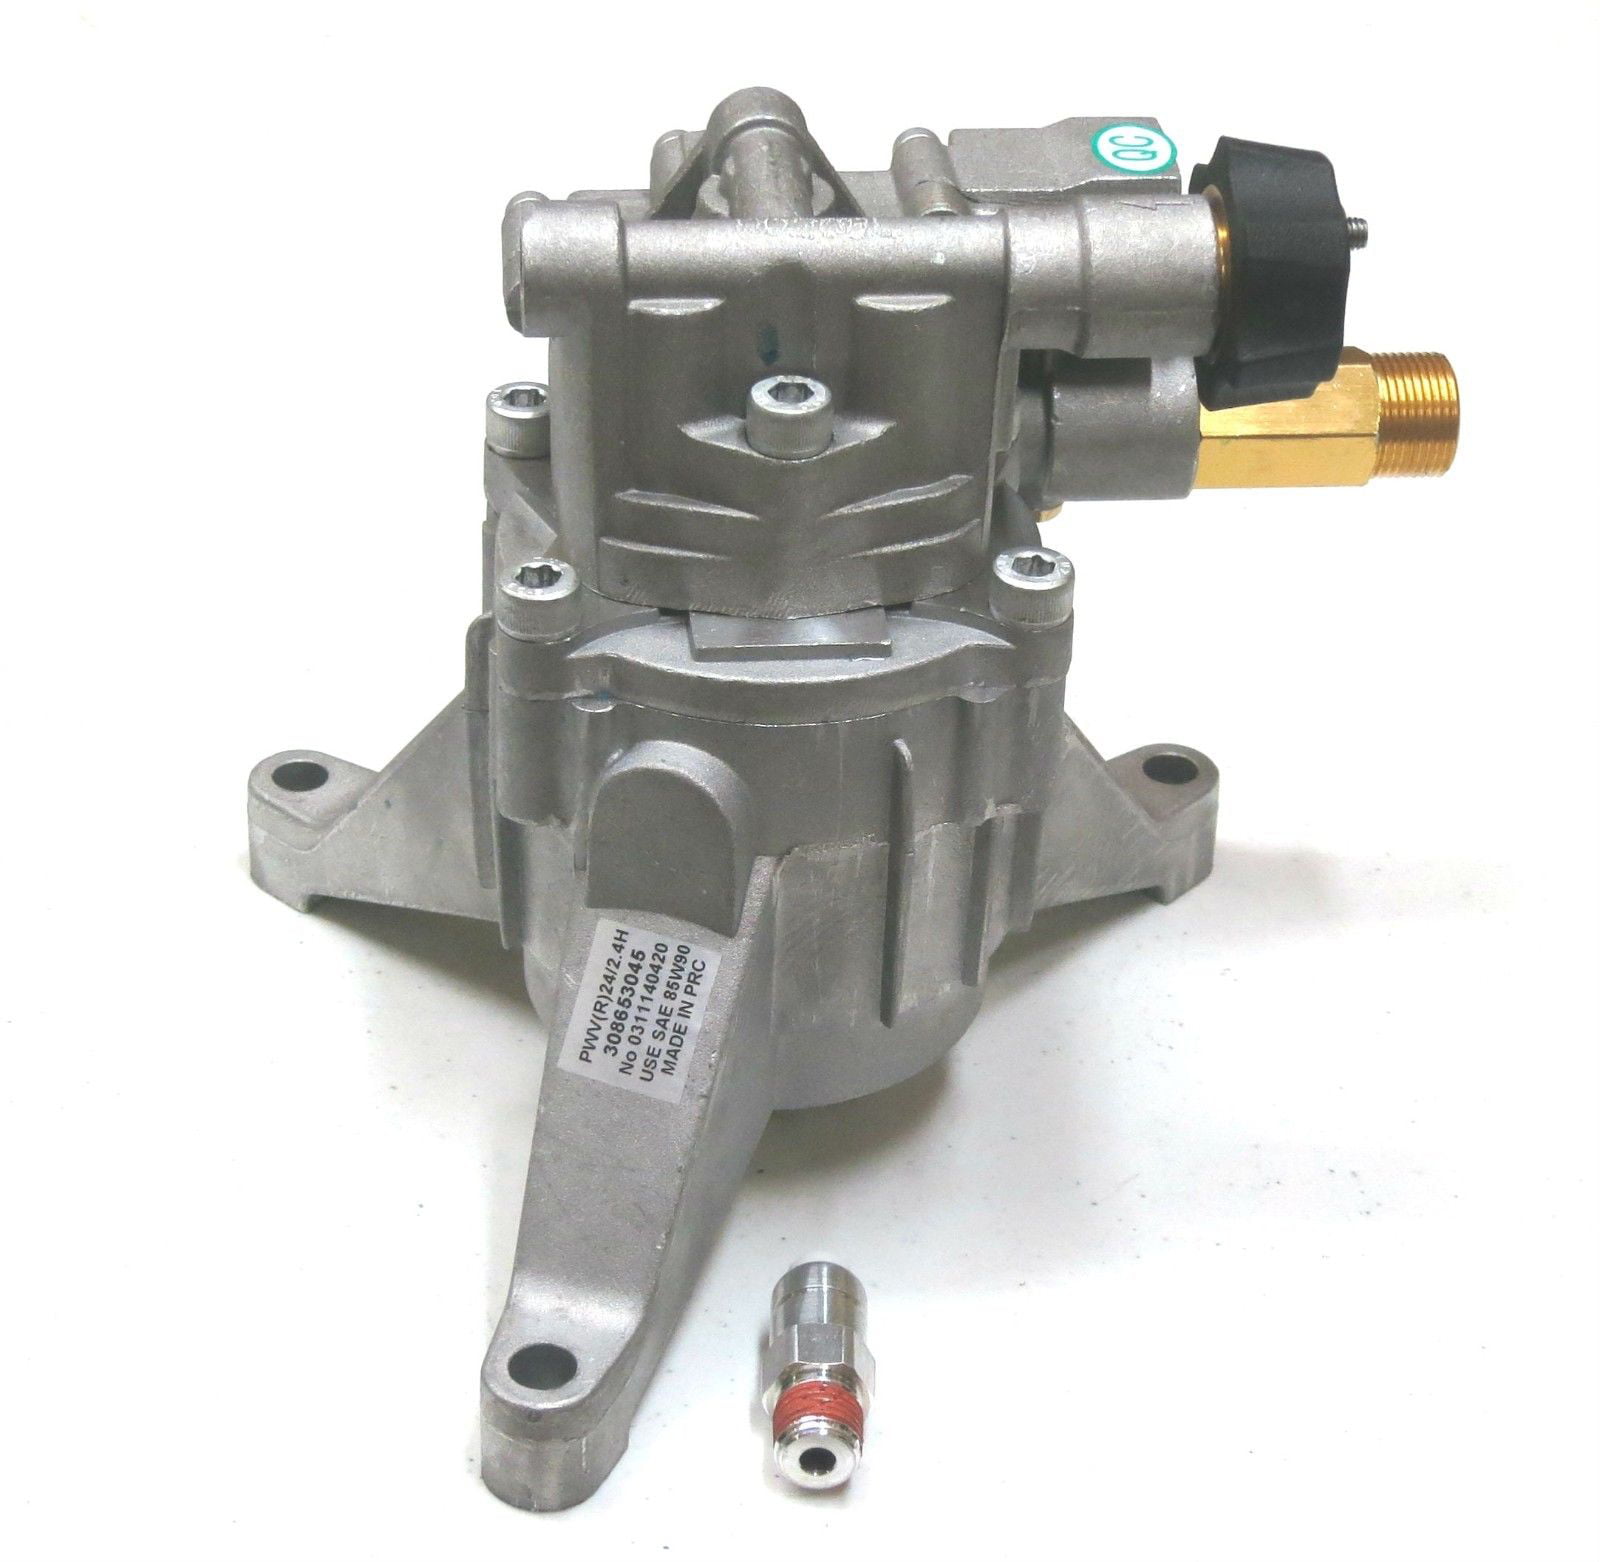 Welironly 2800 psi Power Pressure Washer Water Pump Sears 580.768340 580.768341,#id theropshop; TRYK99271488274883 